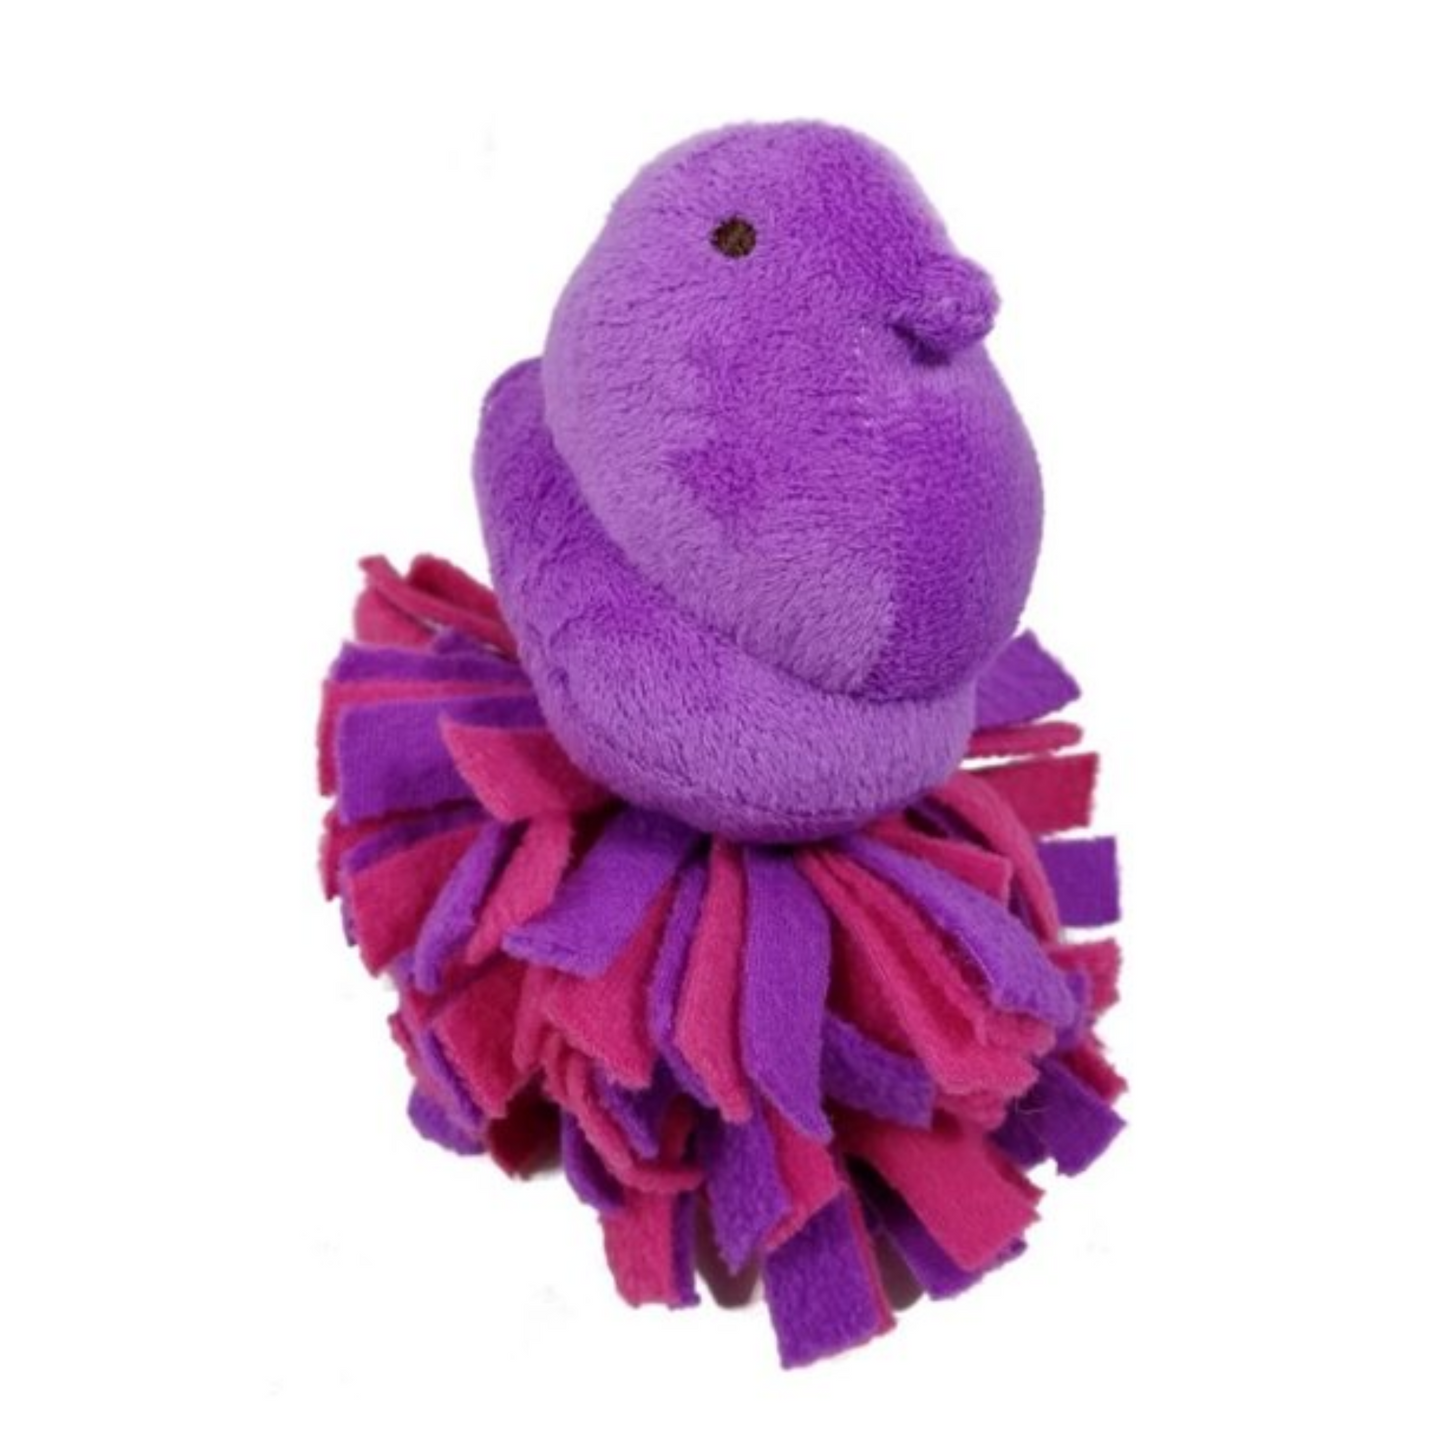 Peeps for Pets Peep Chick Fleece Ball Toy, 4 Count